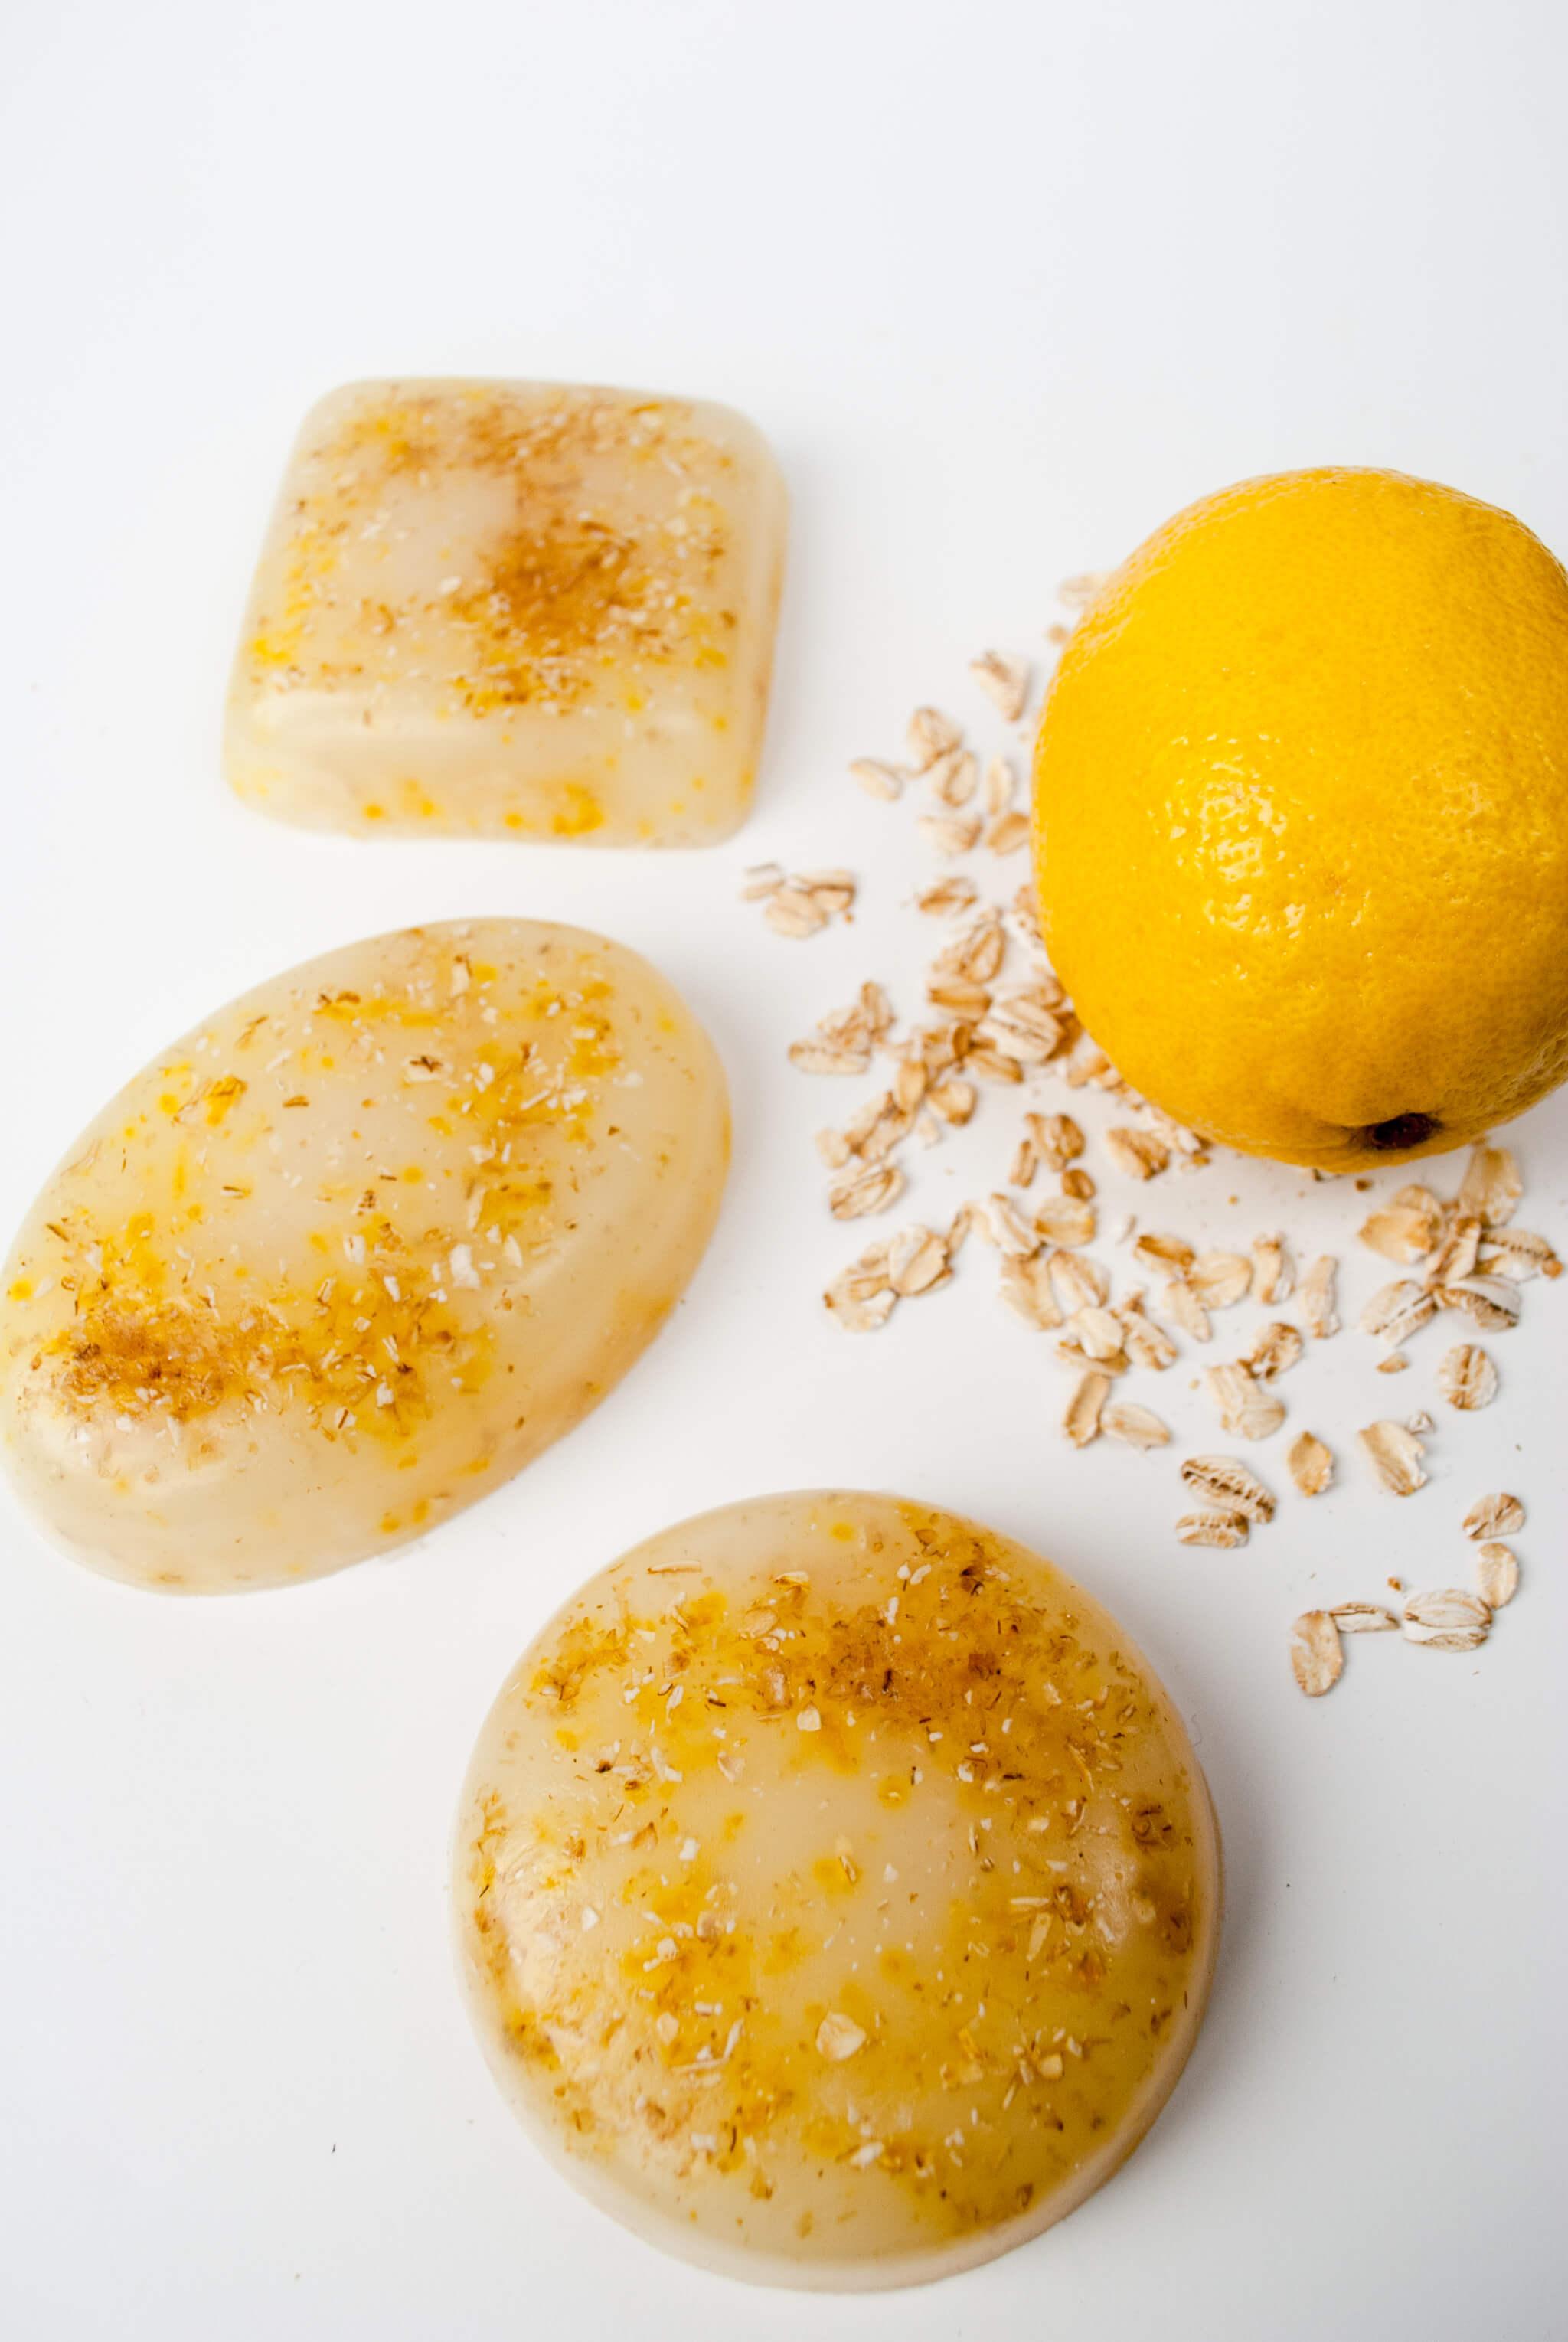 DIY Oatmeal and Lemon Soap. Make this easy 'melt and pour' soap as a DIY gift for Christmas or Mother's Day.